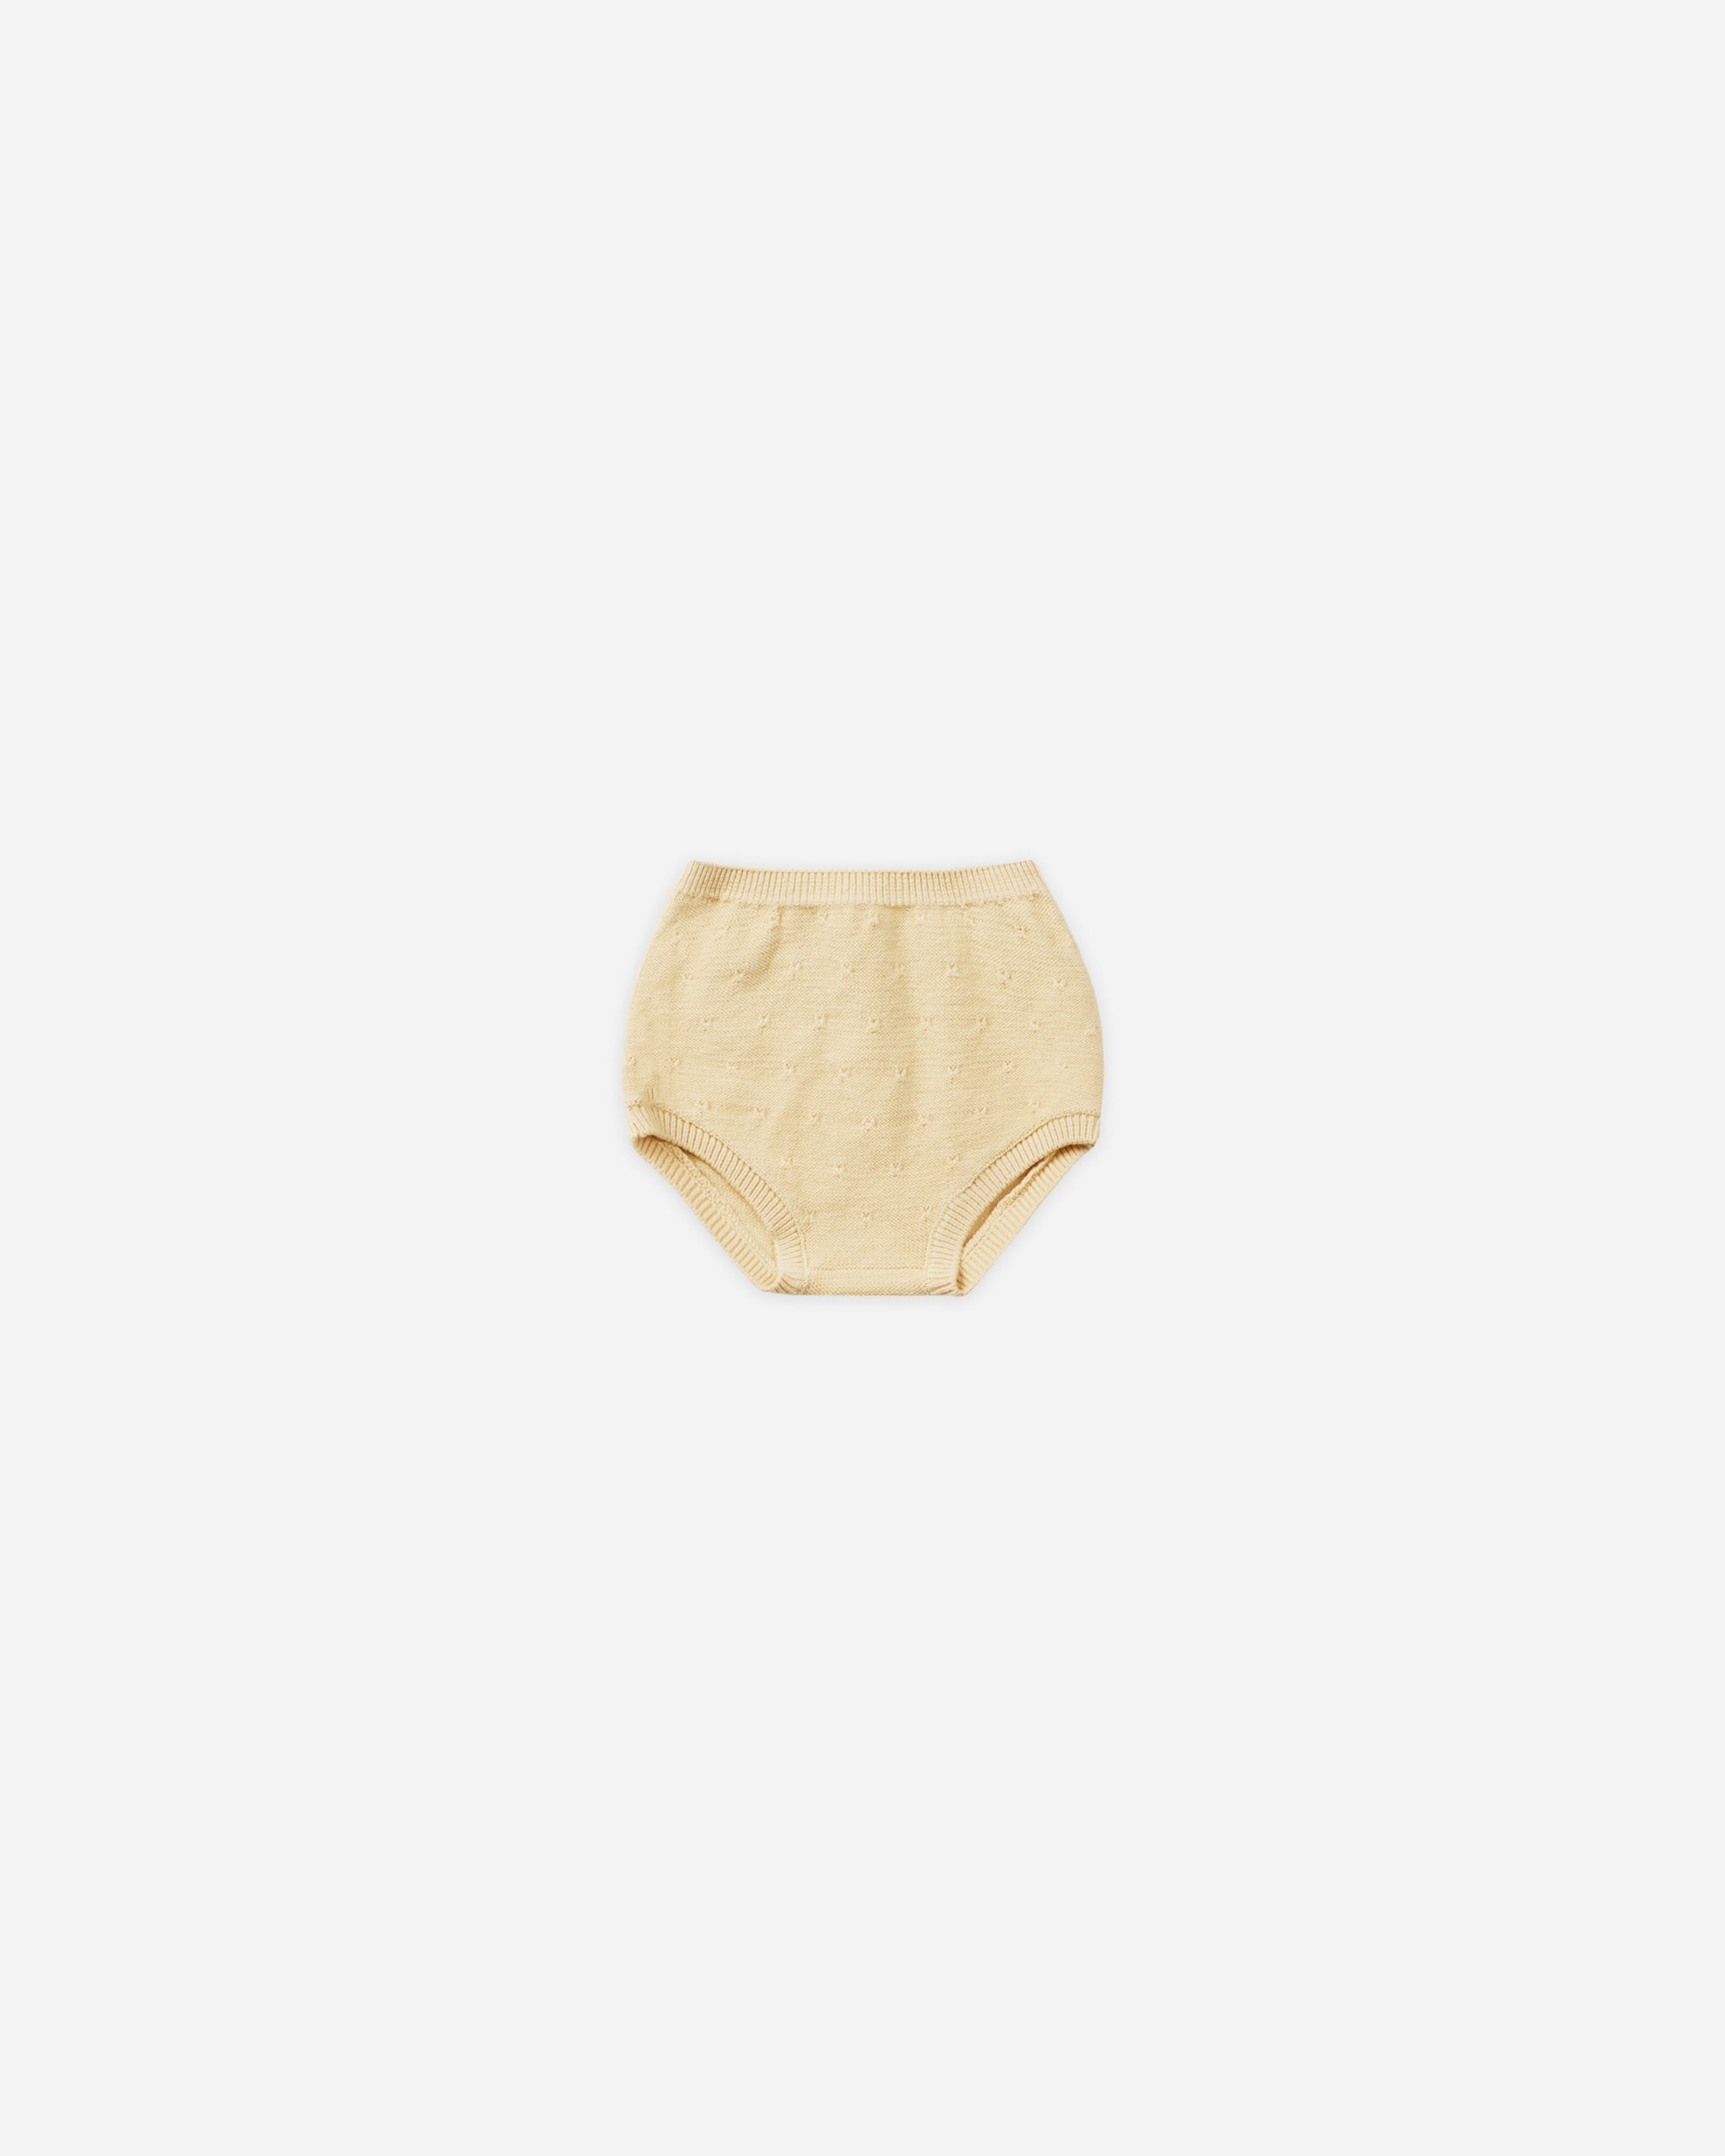 Knit Bloomer || Lemon - Rylee + Cru | Kids Clothes | Trendy Baby Clothes | Modern Infant Outfits |